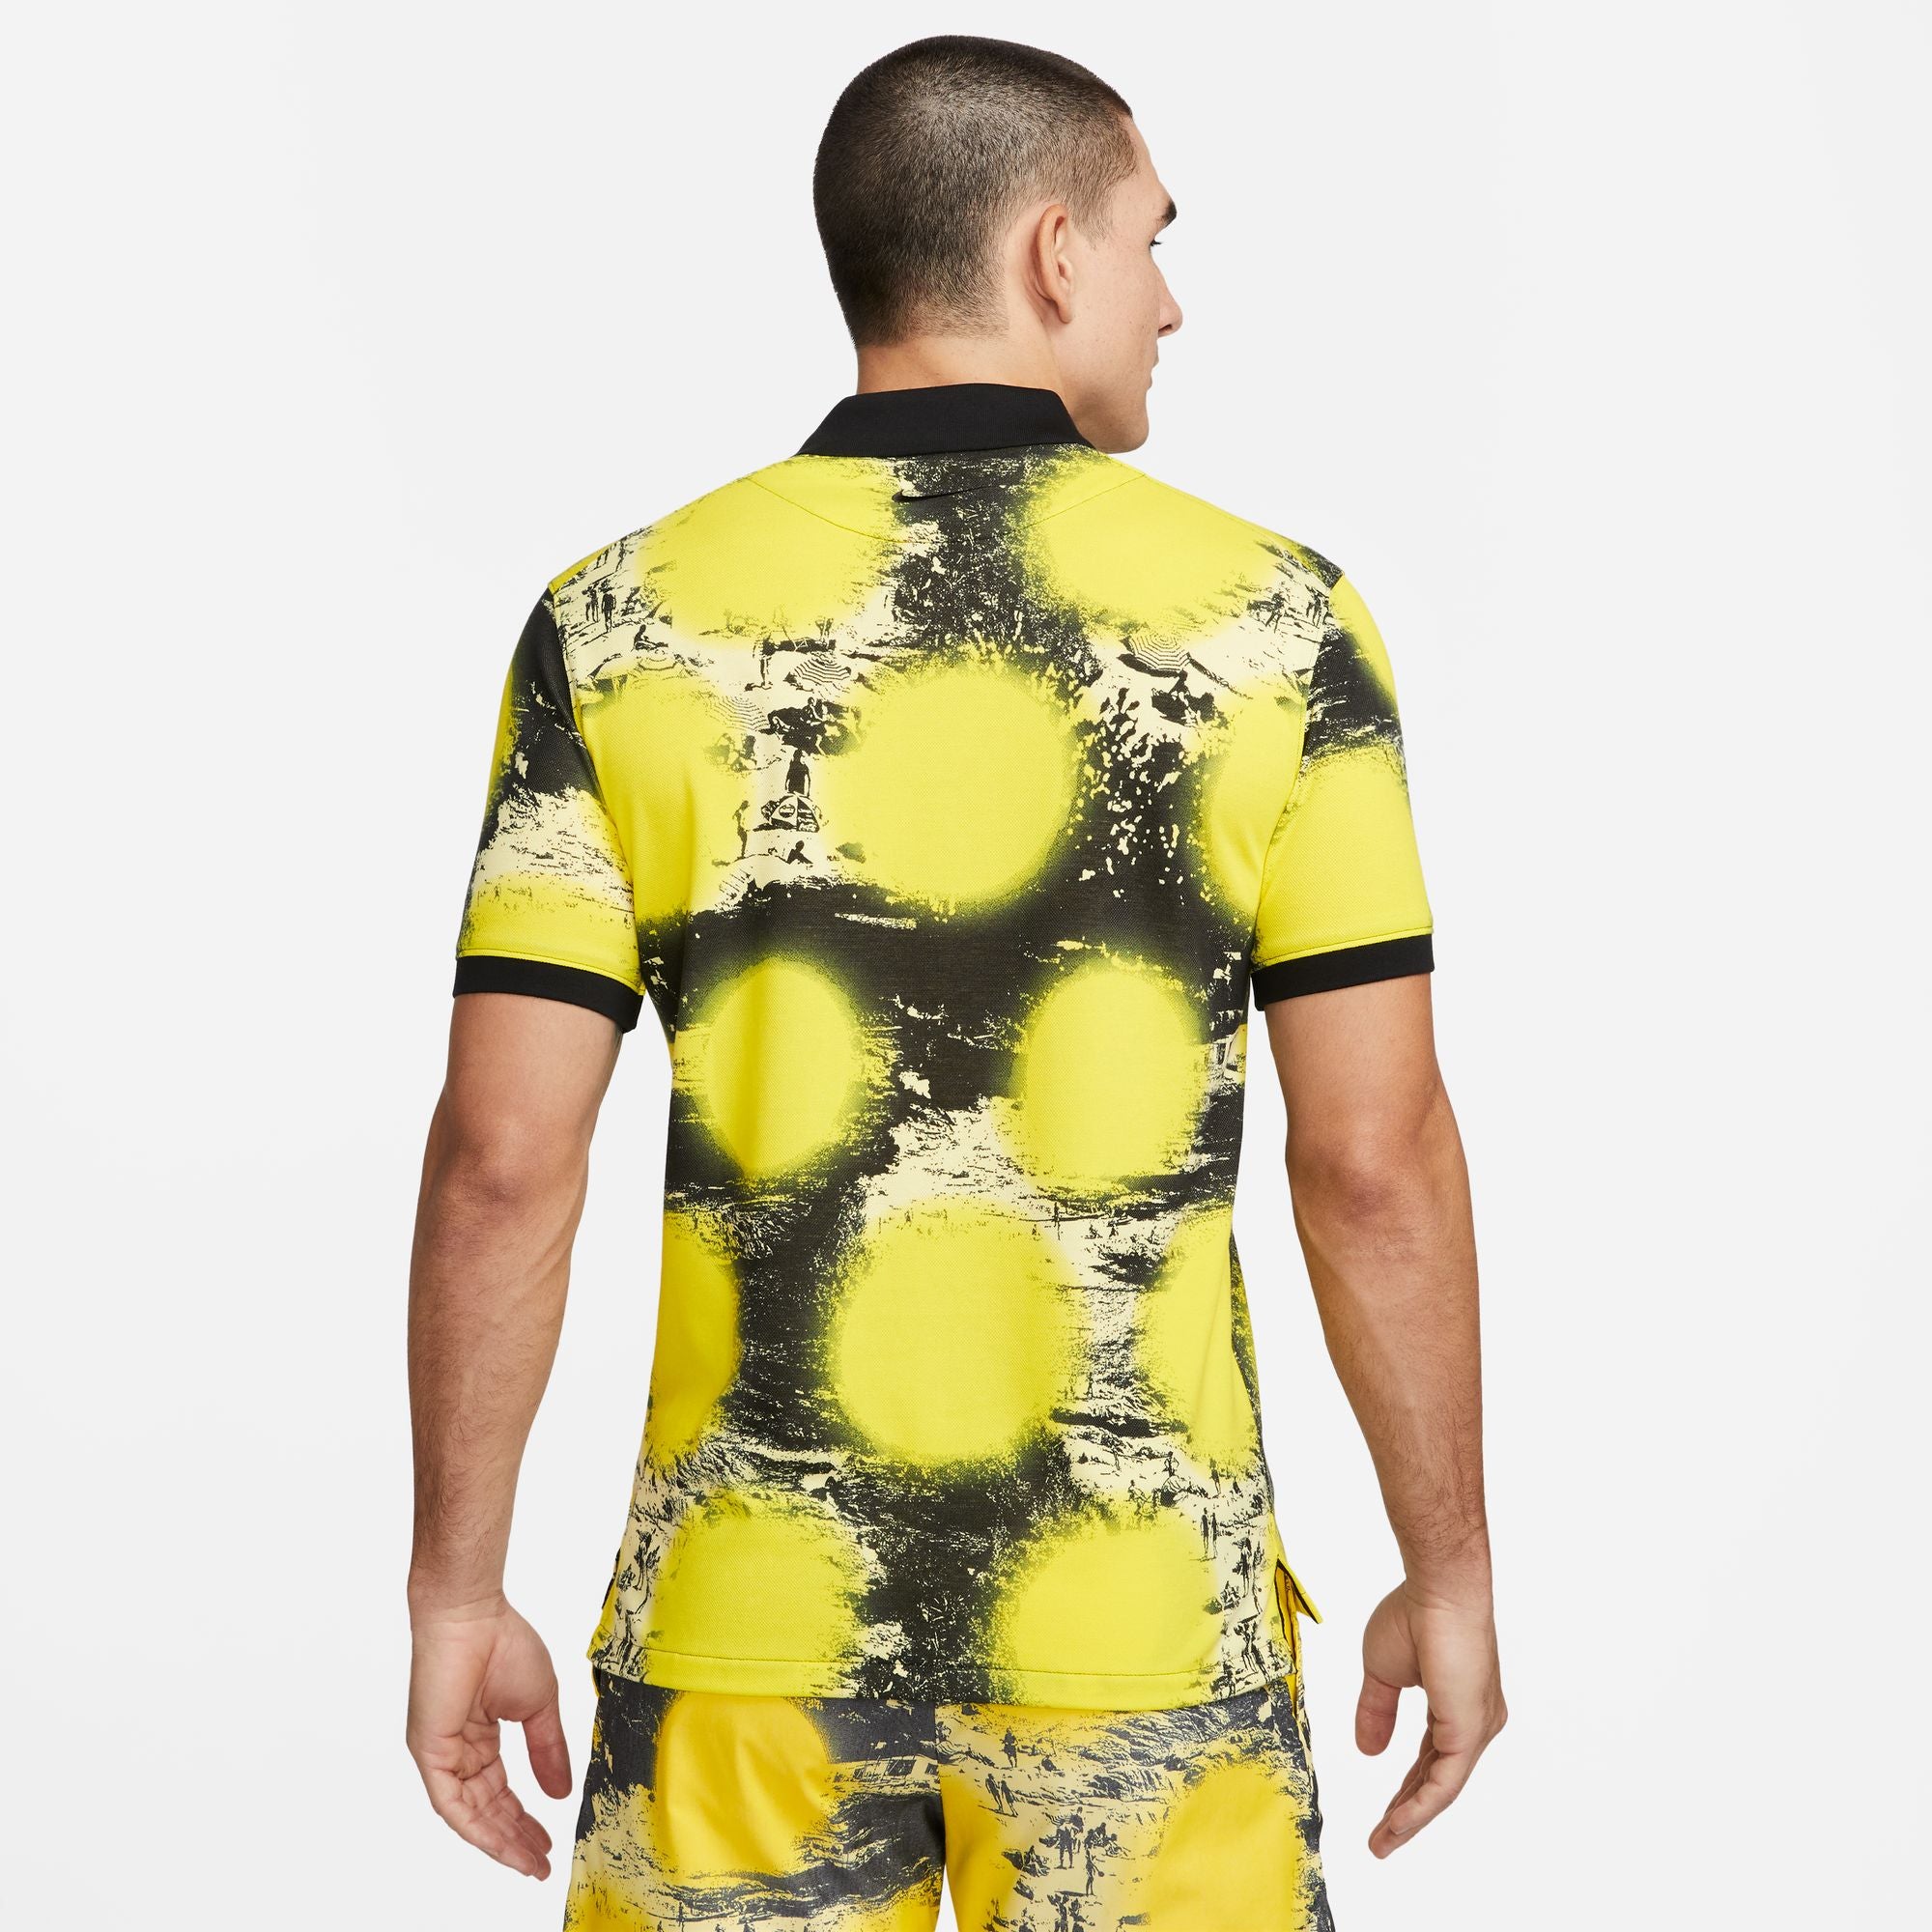 The Nike Men's Polo Printed Slim-Fit Polo